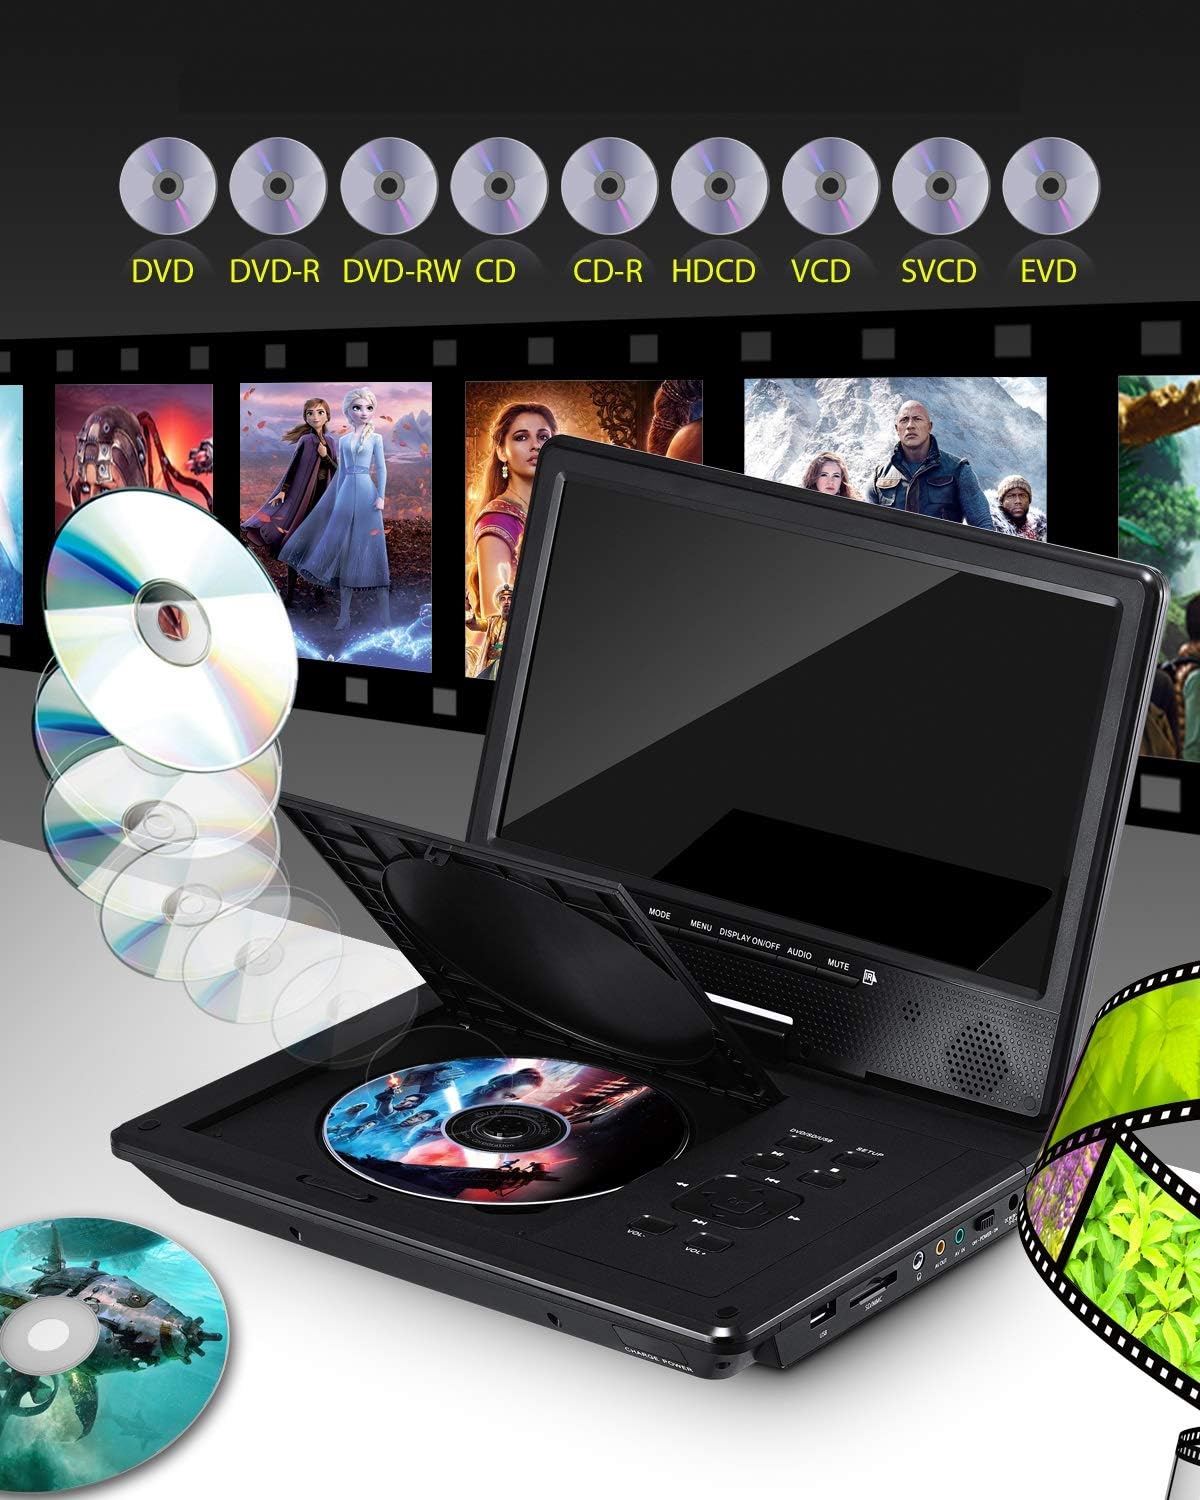 UEME Portable DVD Player for Car with 10.1" HD Swivel Display Screen - $55